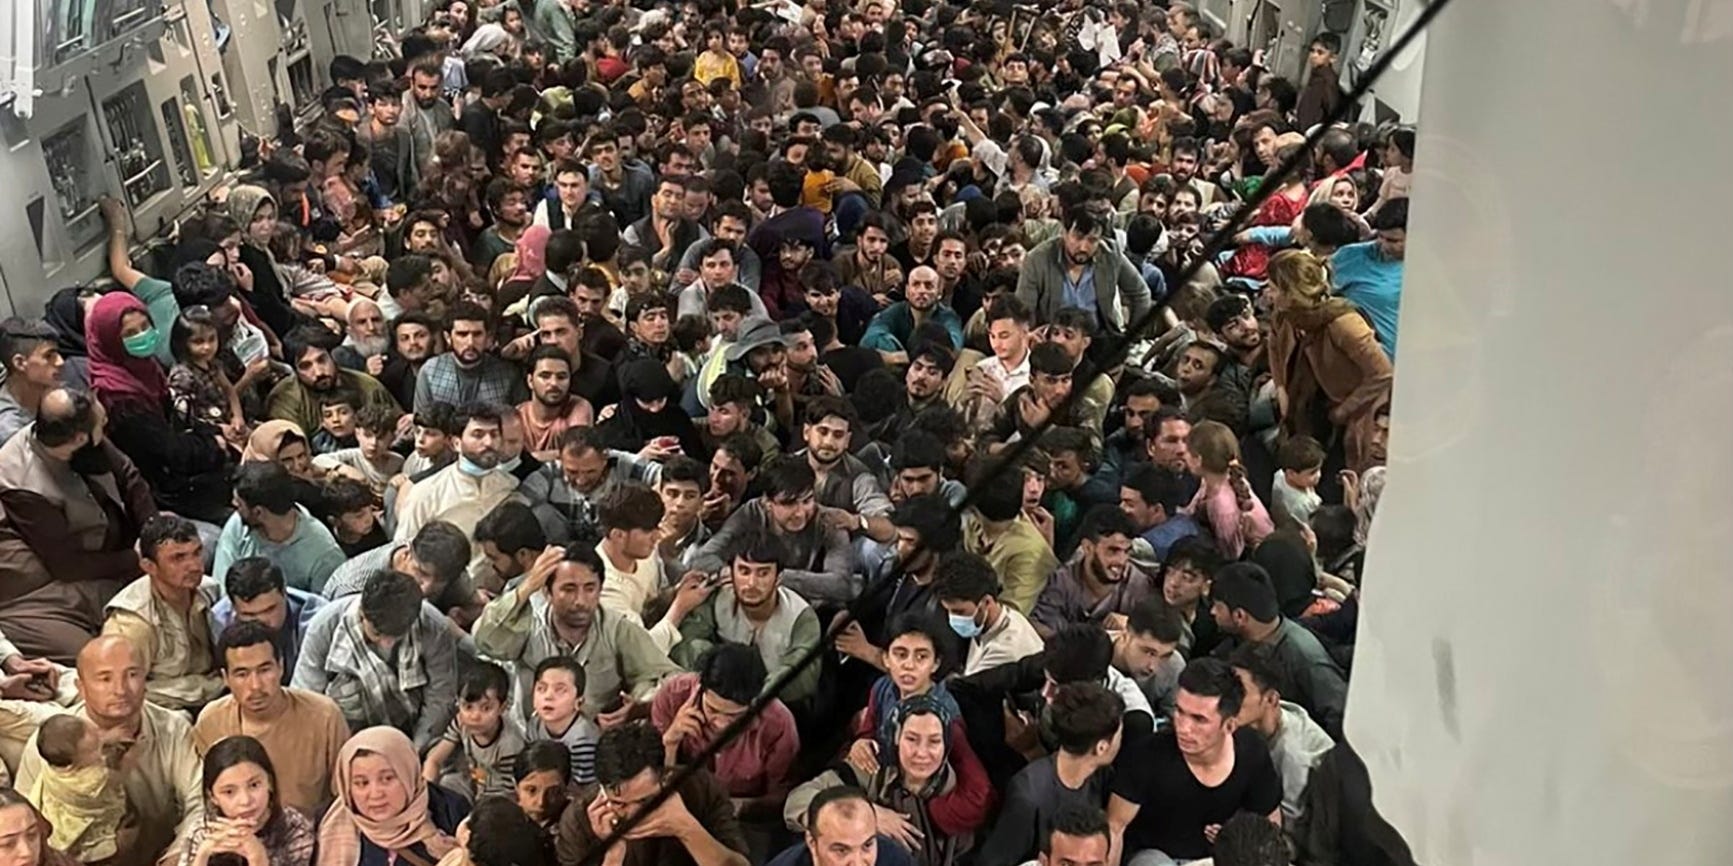 Hundreds of people sitting on the floor of a transport aircraft